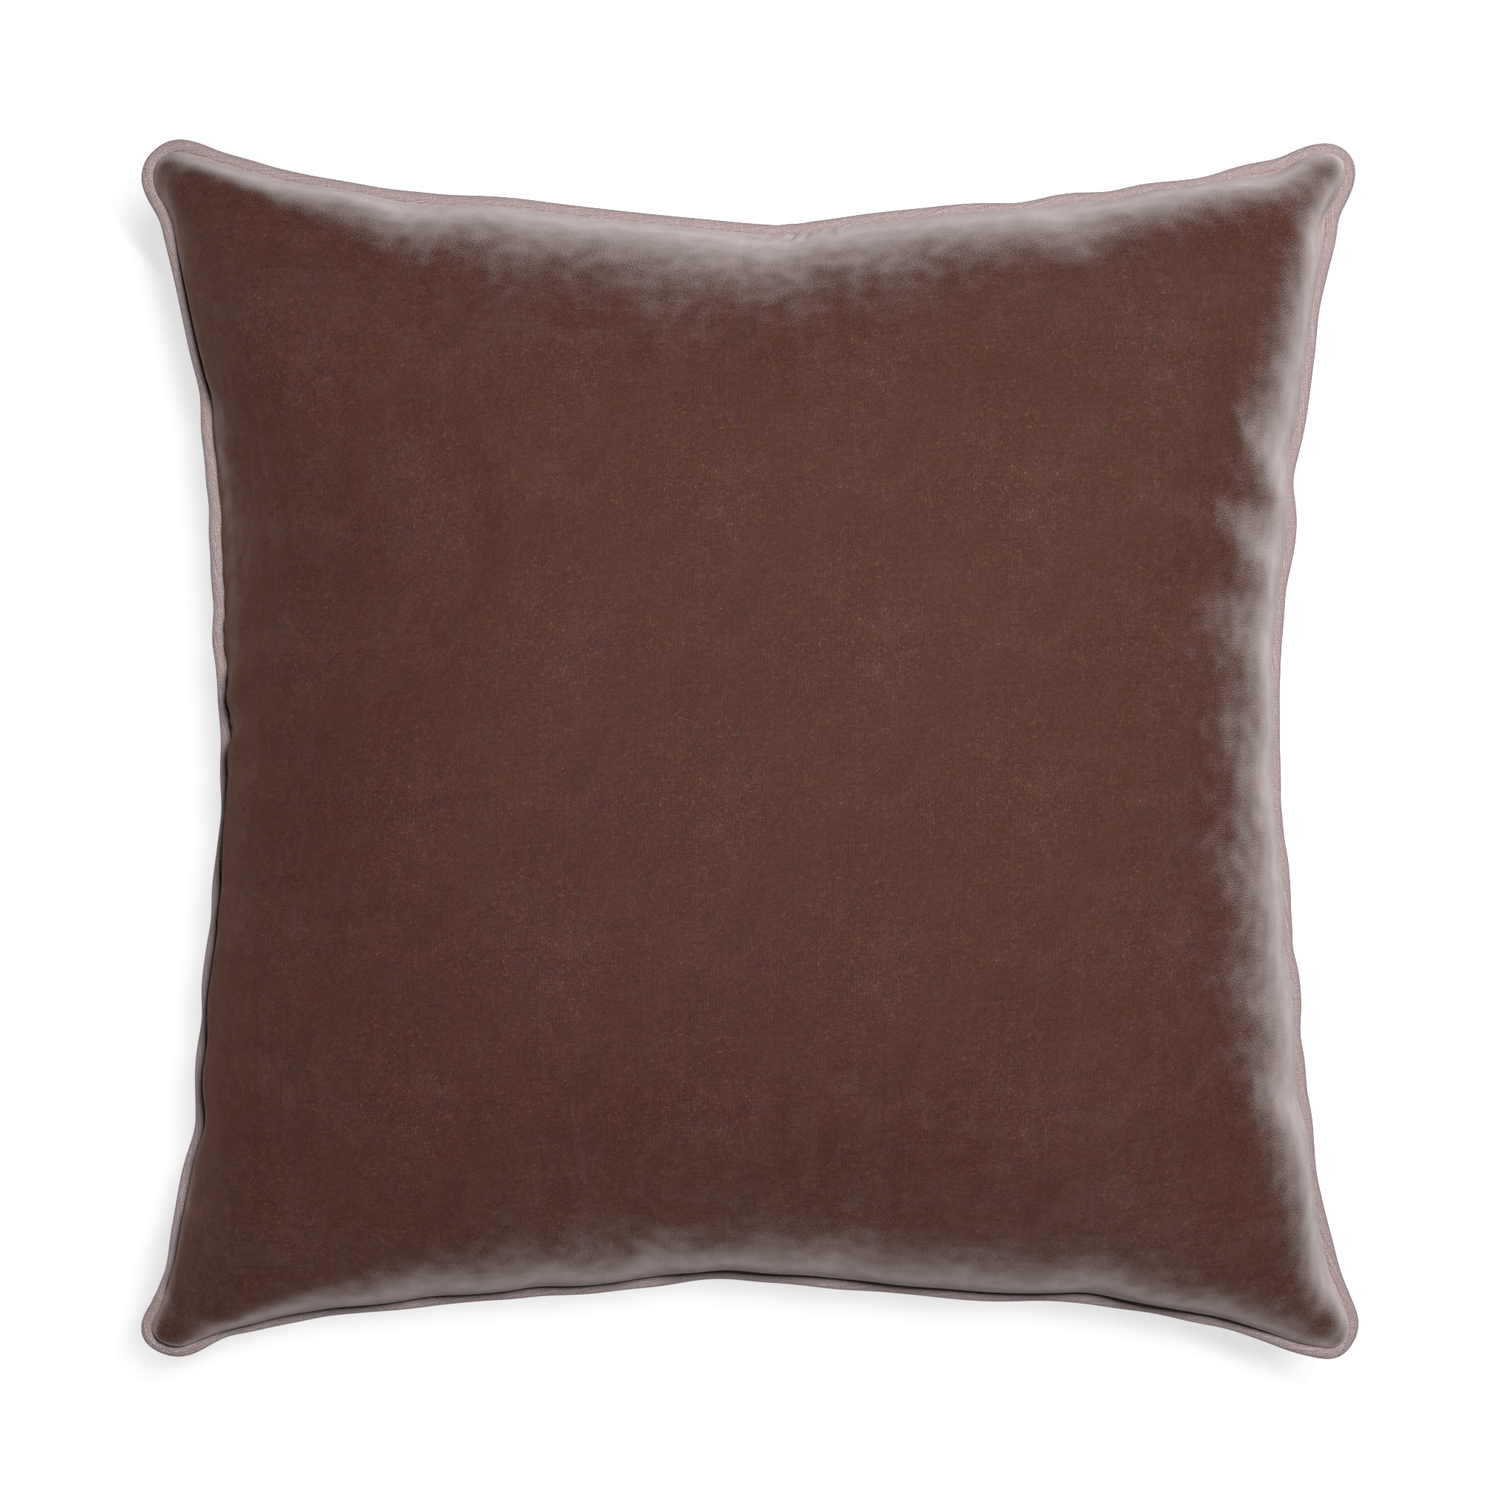 Euro-sham walnut velvet custom brownpillow with orchid piping on white background